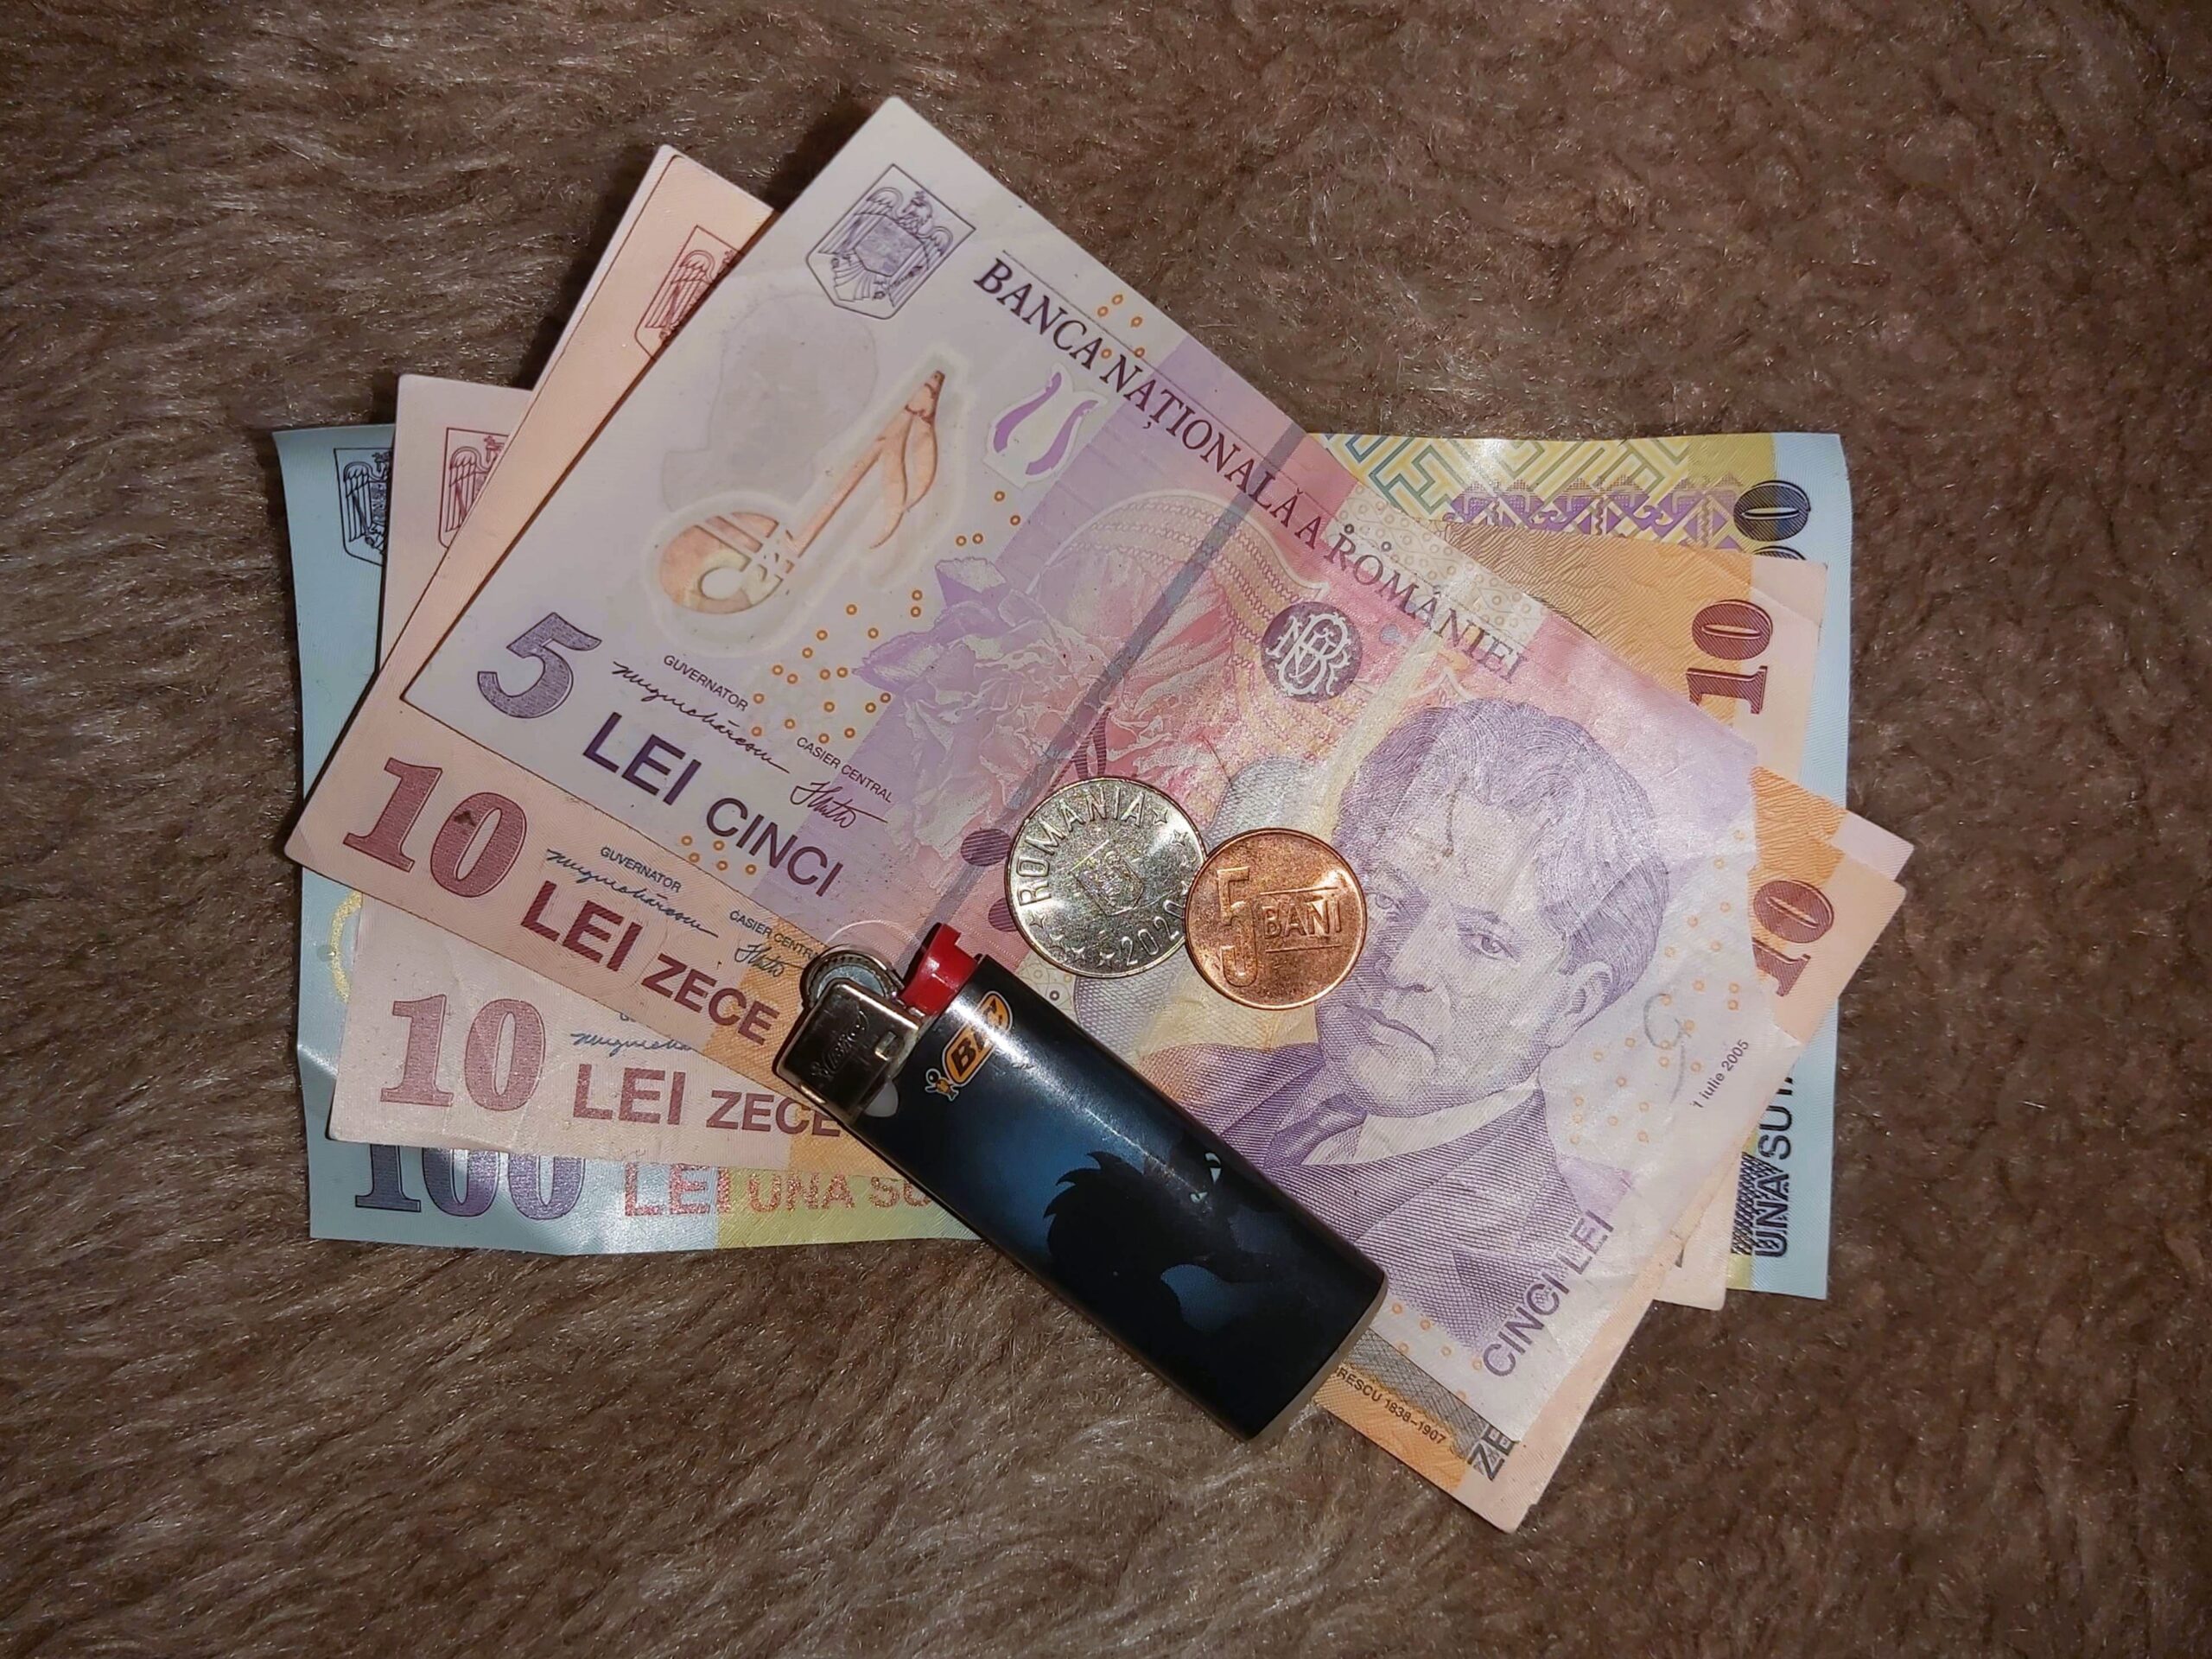 A selection of Romanian currency, with a lighter that has a black cat picture